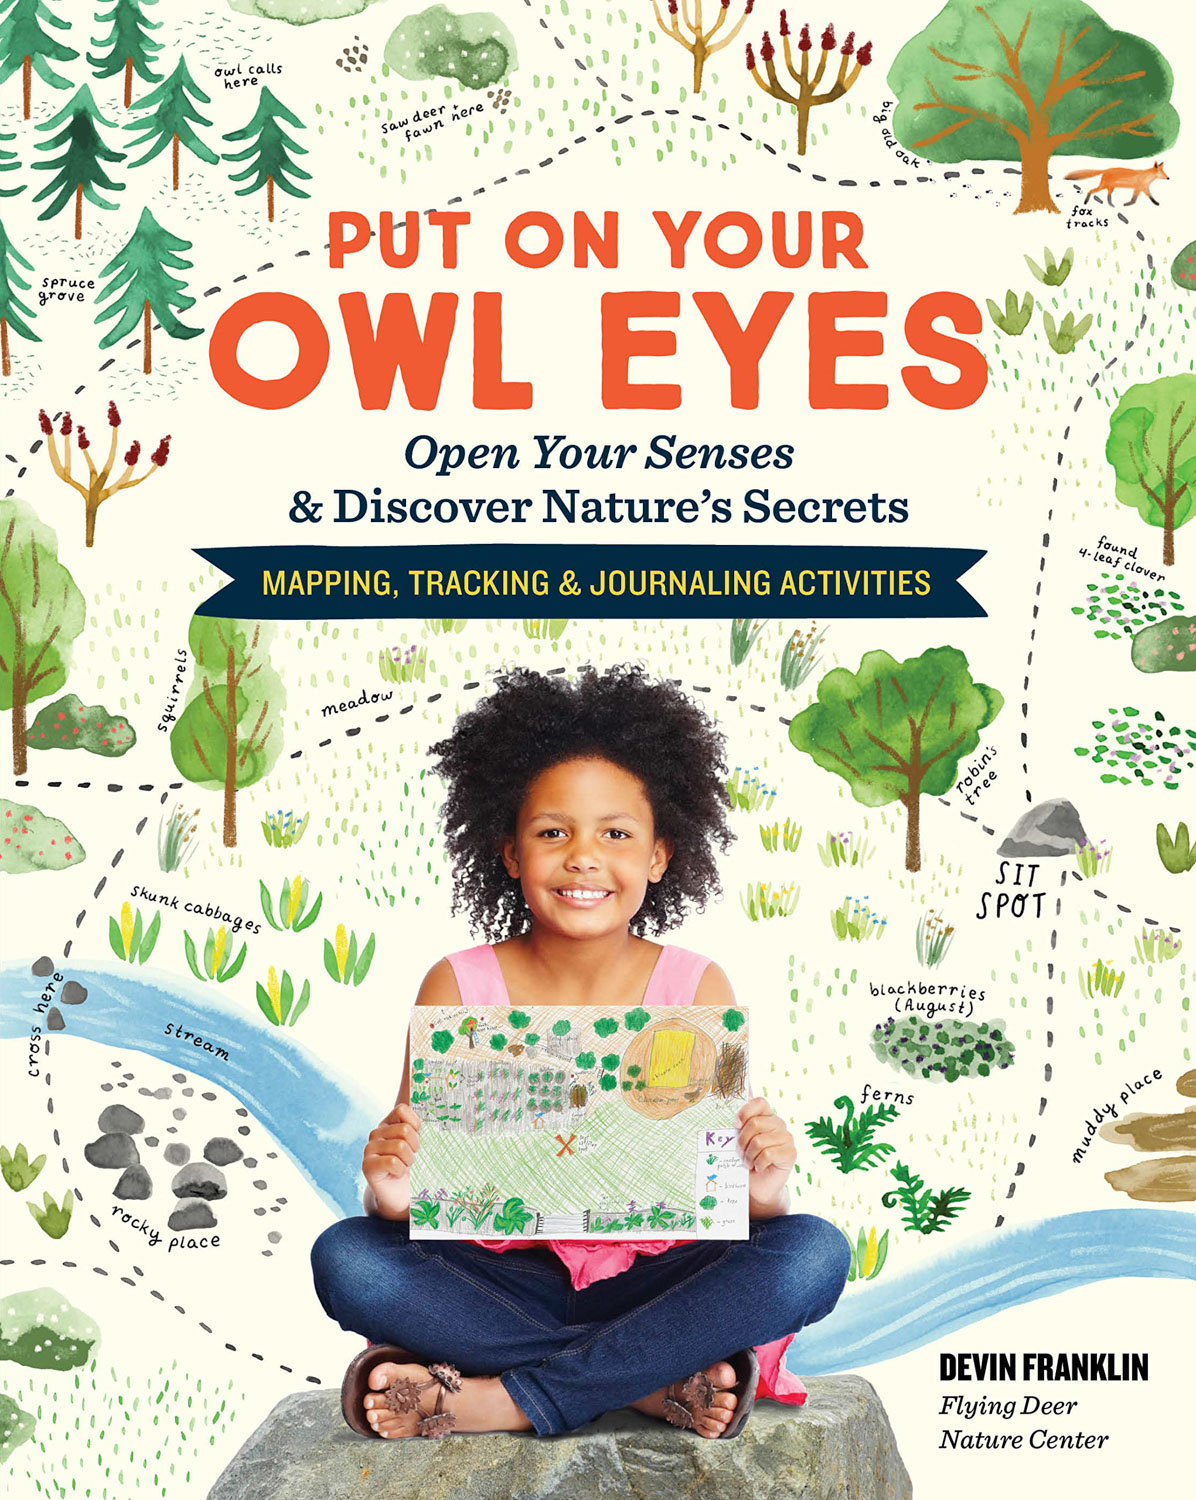 15 Outdoor & Nature Books for Young Readers